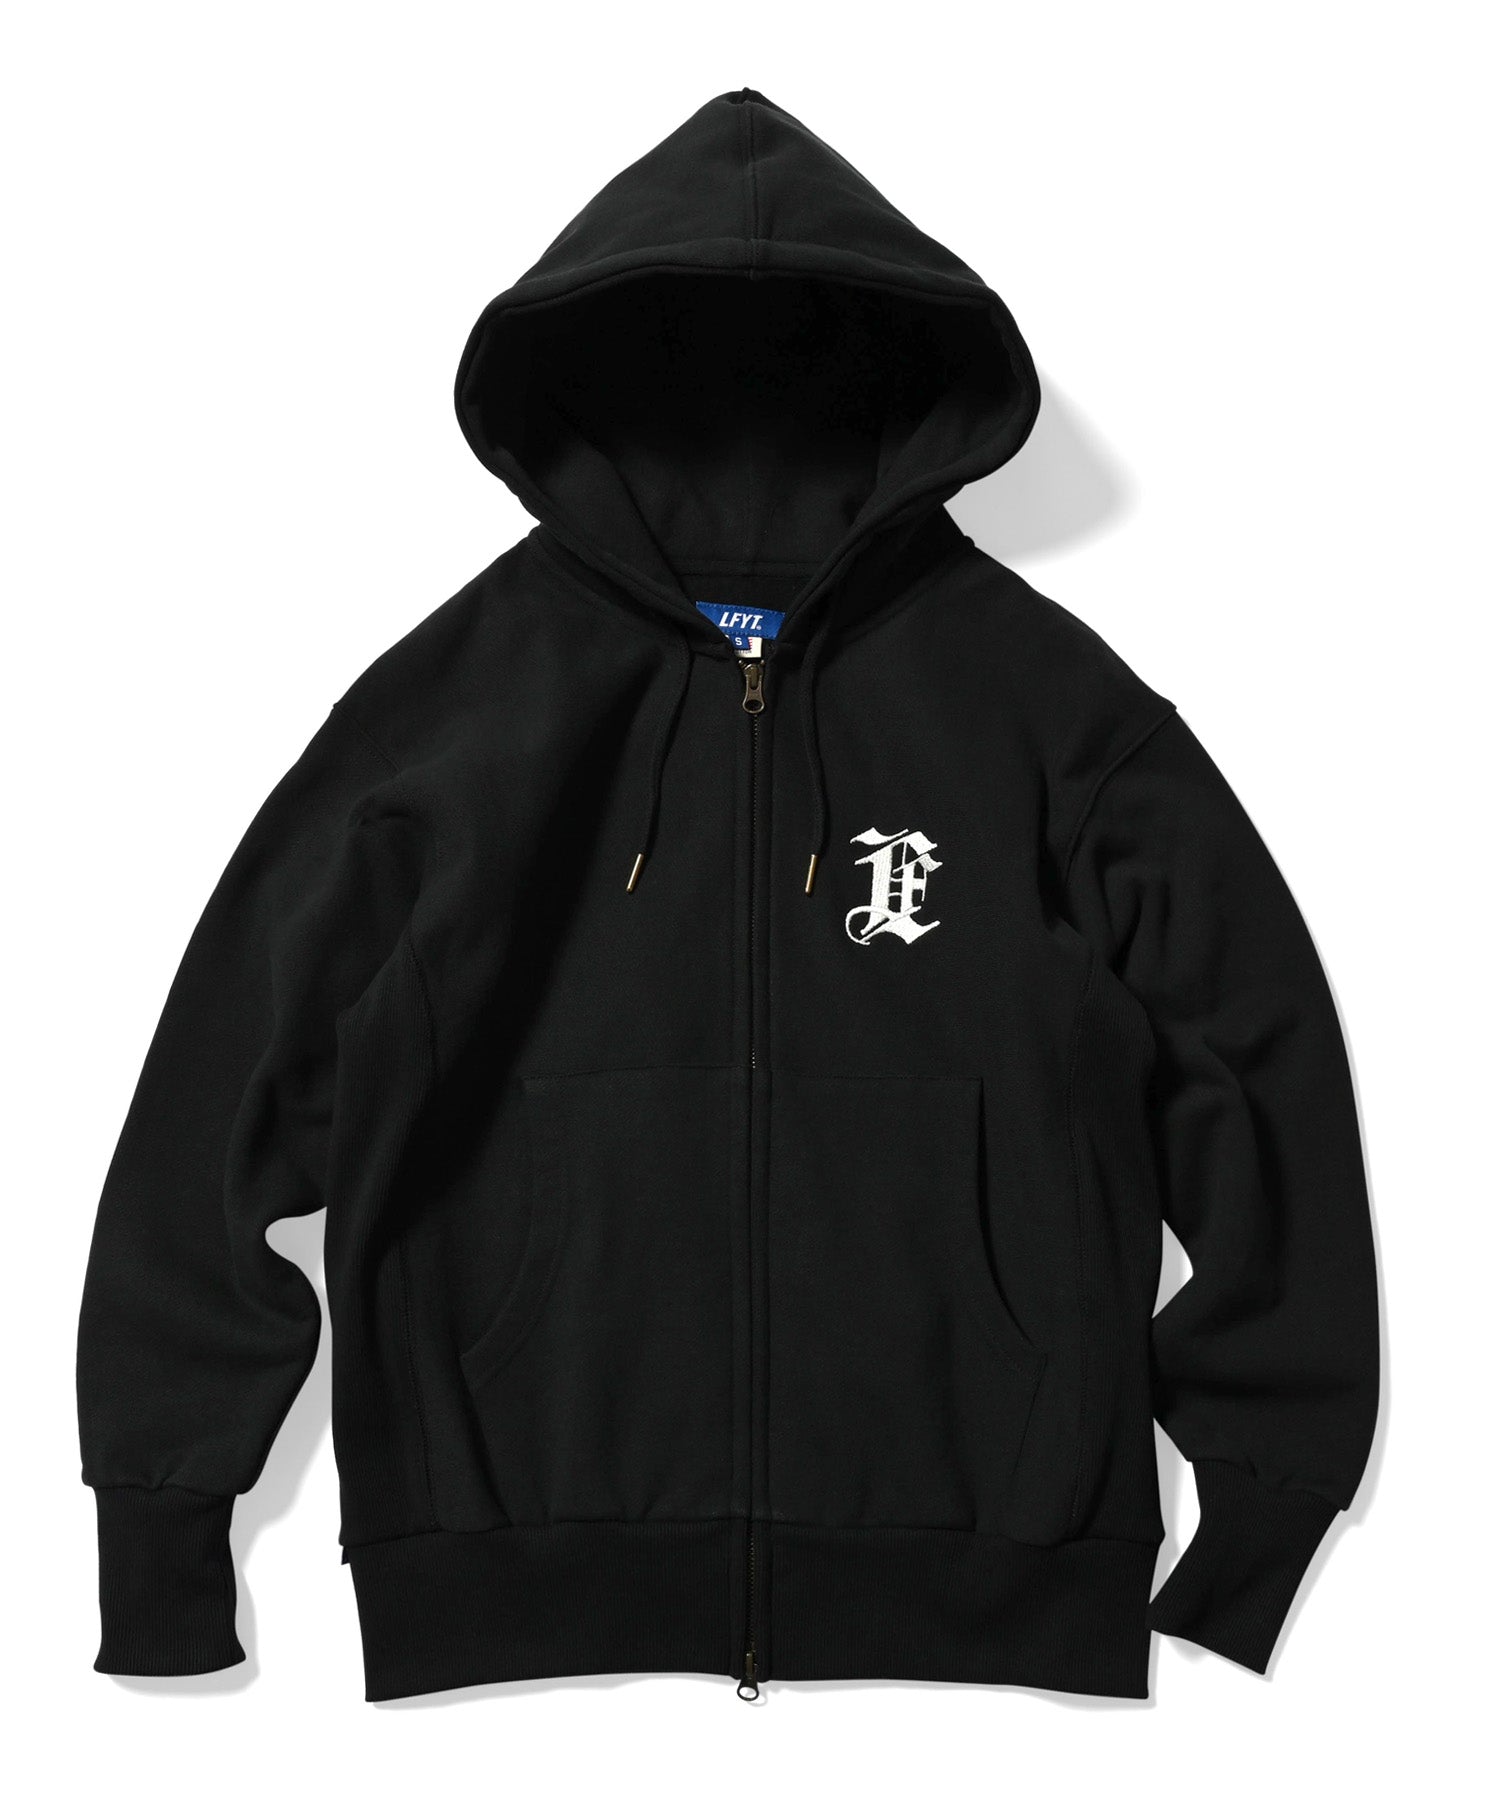 LFYT/OUTLINE LOGO ALLOVER HOODED SWEATパーカー/L/コットン/BLK ...